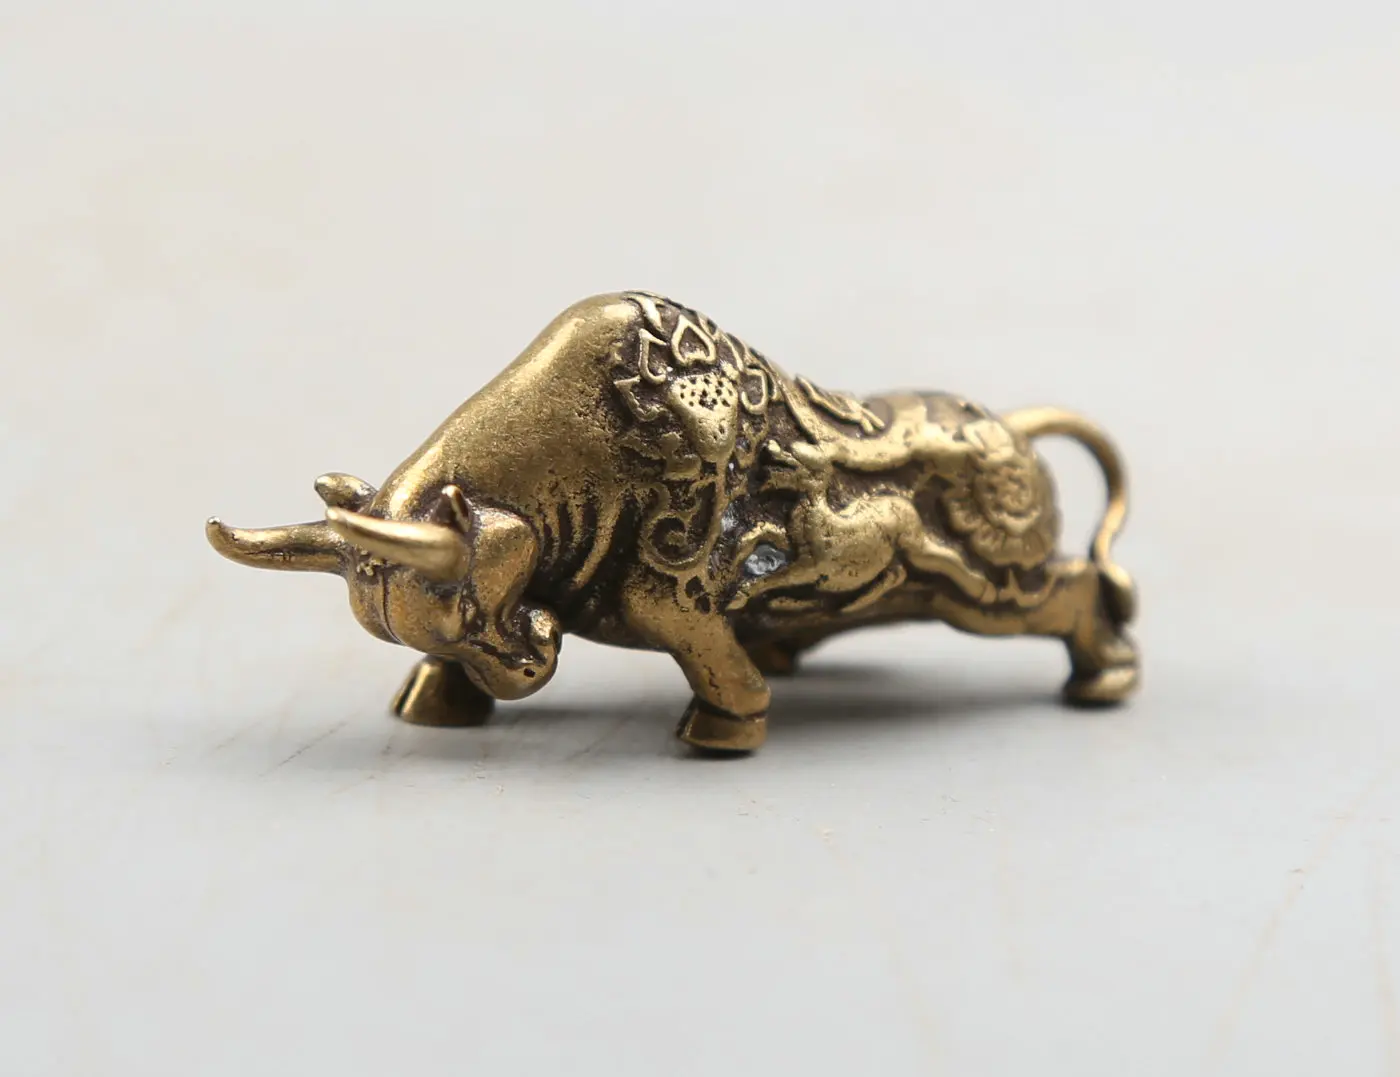 

46MM/1.8" Collect Curio Rare China Fengshui Small Bronze Exquisite Animal 12 Zodiac Year Bull Oxen Ox Cattle Moo-cow Statuary29g